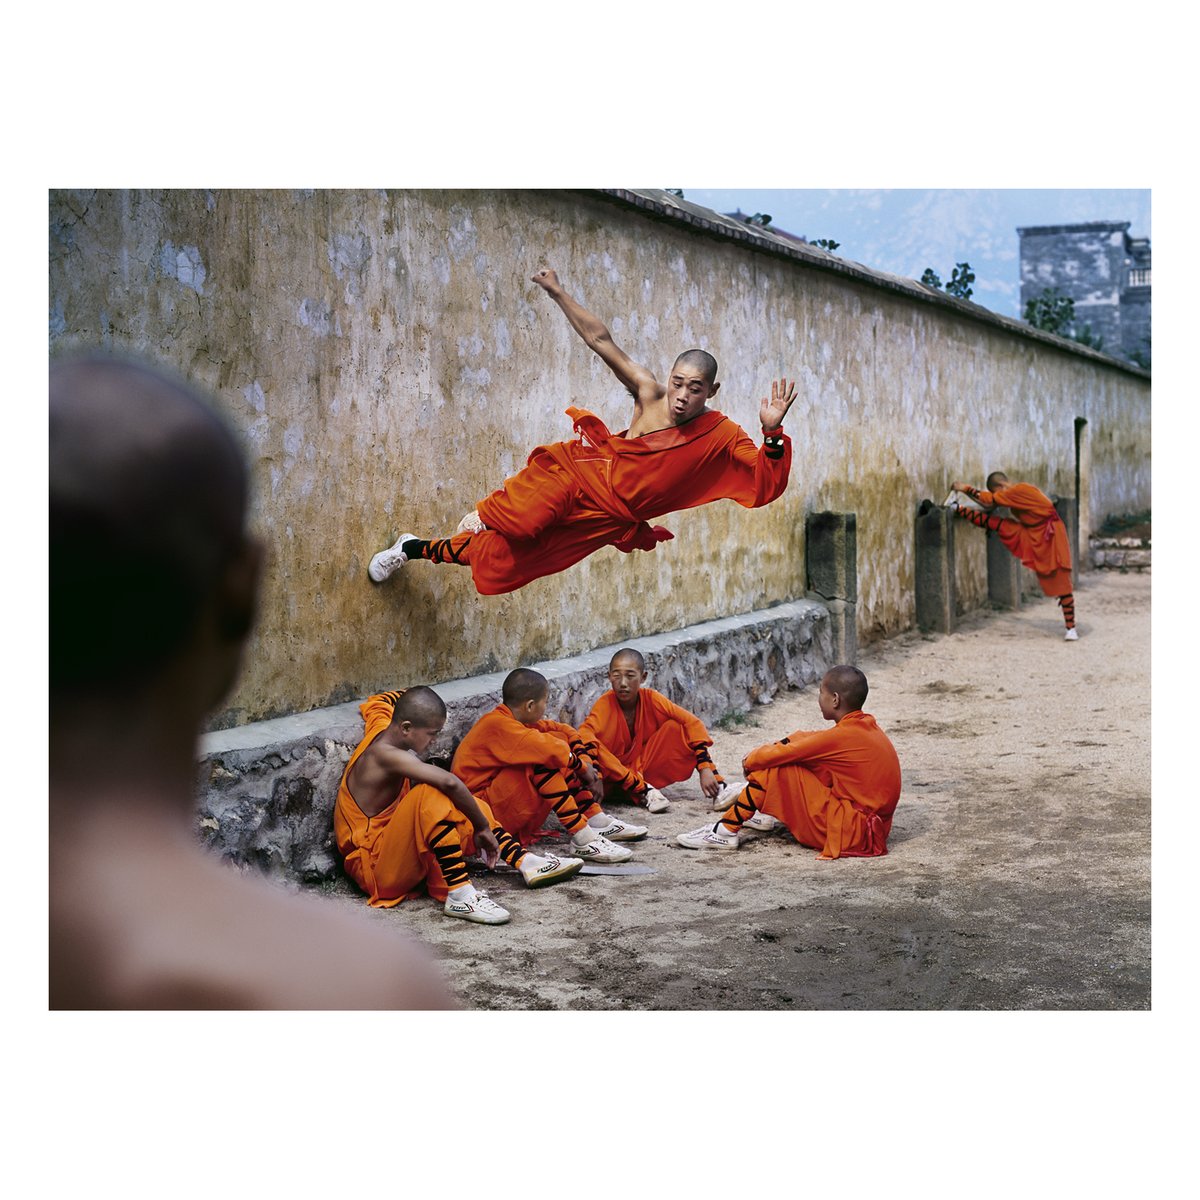 (5/6) With Fable, Magnum and Granta seek to champion the lasting impact of stories and their tellers through a unique combination of images and words.

© @McCurryStudios / Magnum Photos